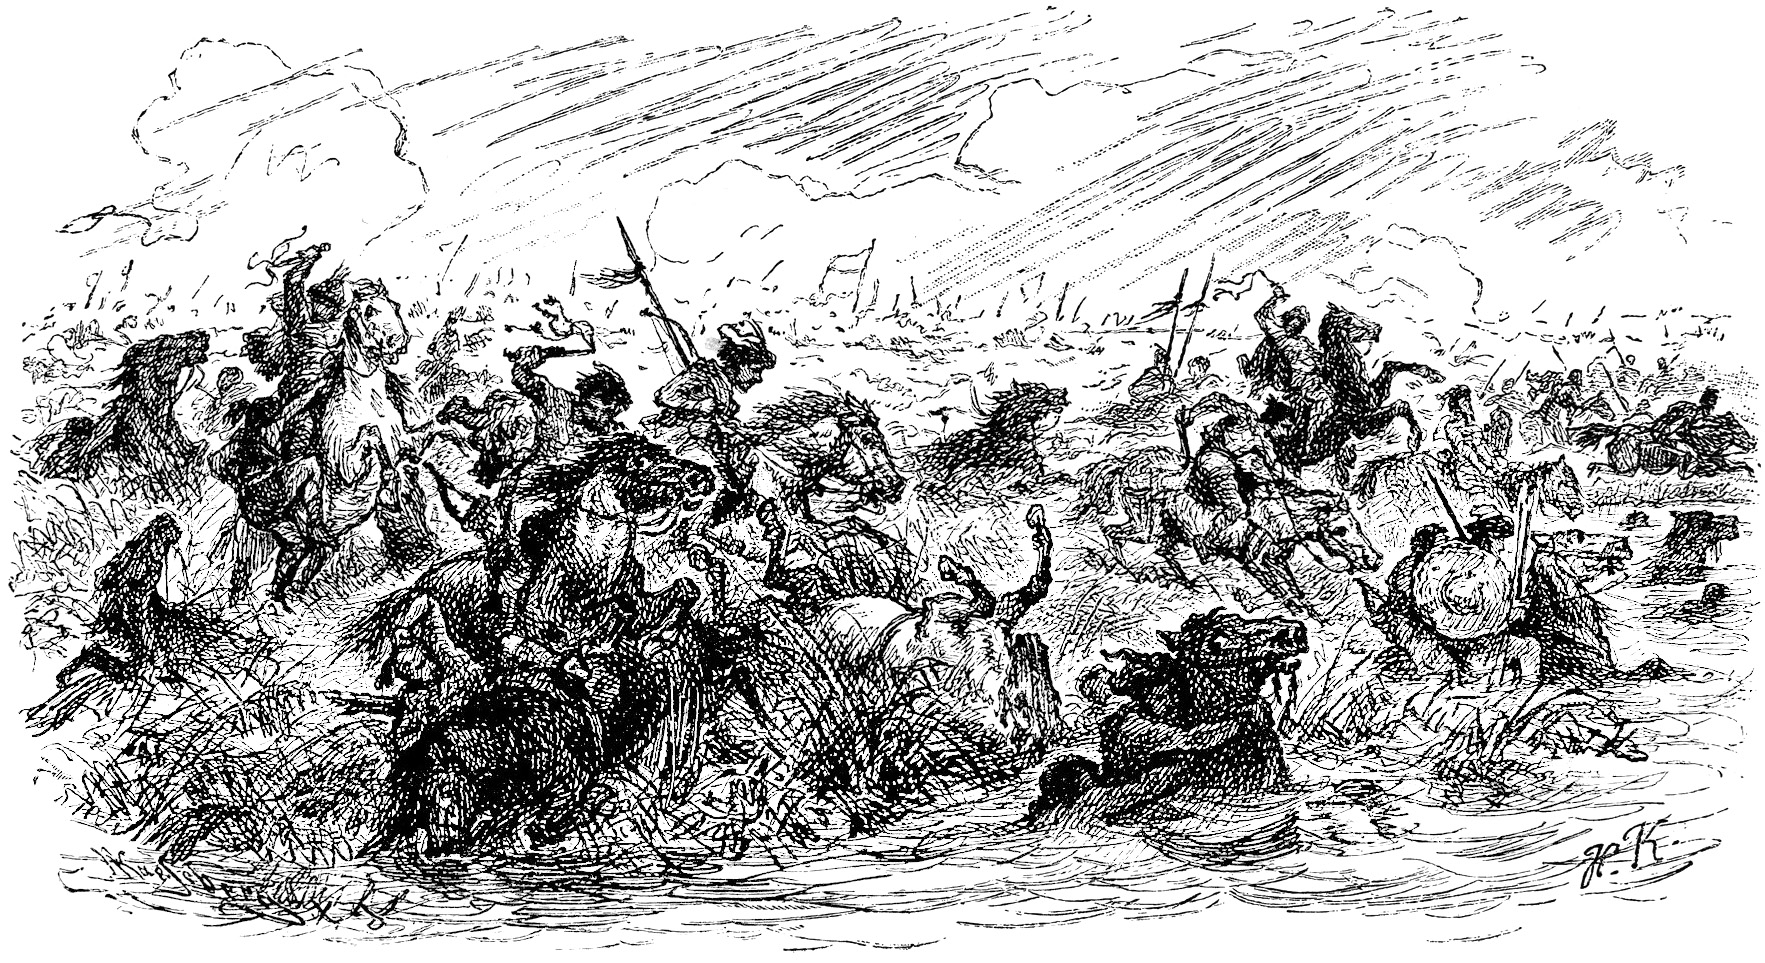 Marauding Magyar warriors cross the Lech River near Augsburg, Germany, on August 10, 955. The Magyars long had made a habit of raiding helpless German settlements.